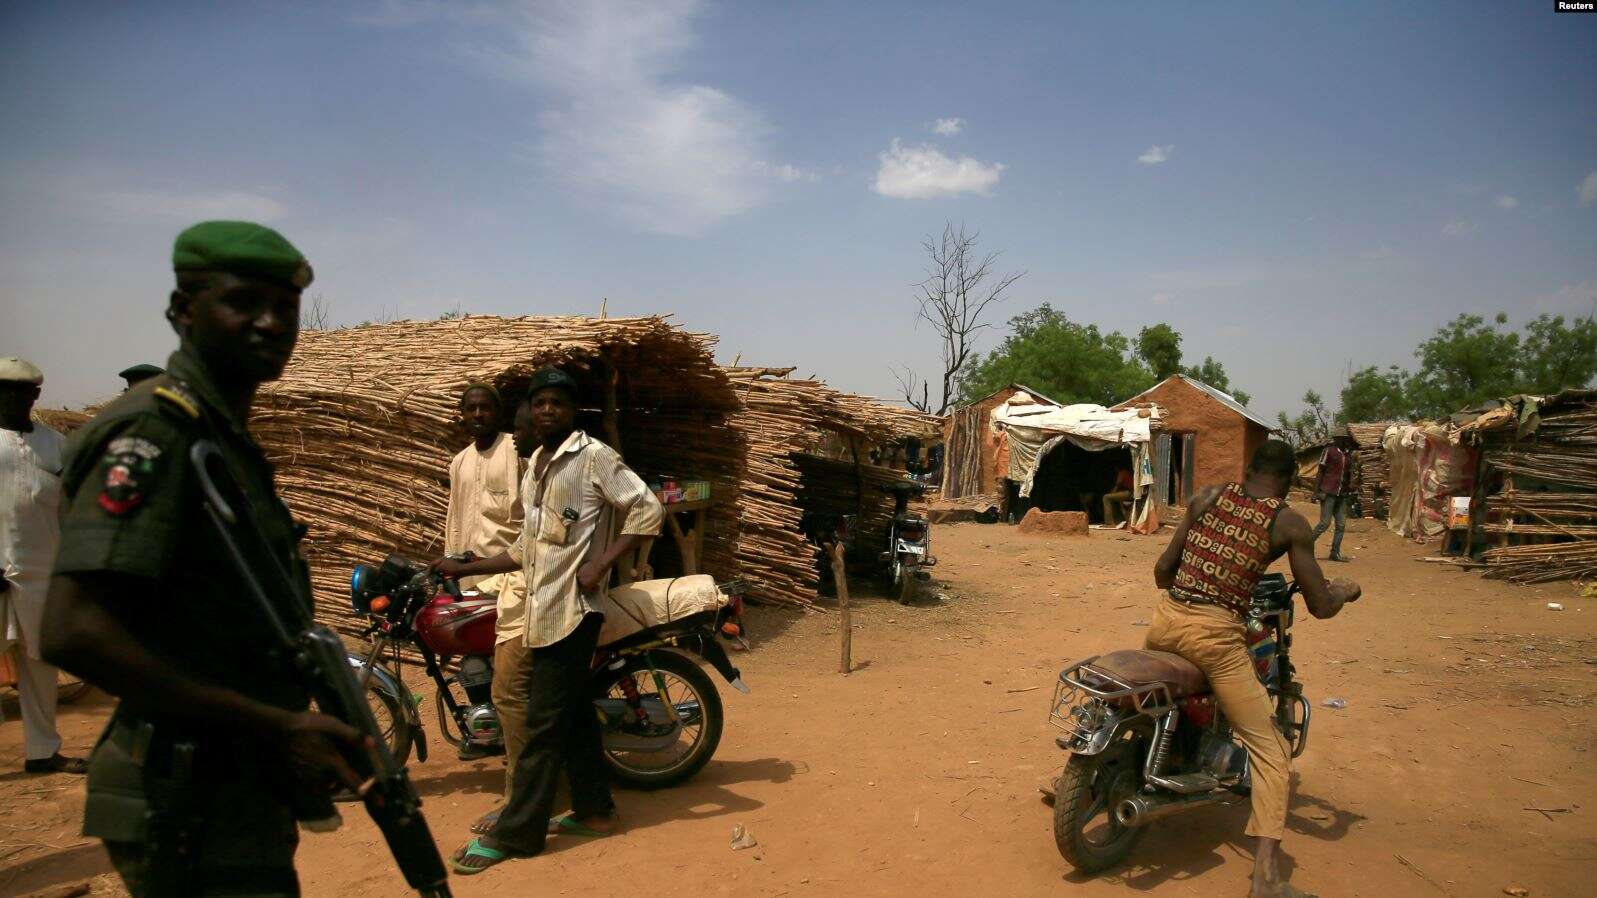 Ethnic clashes in Nigeria send 20,000 fleeing into Niger - Nile Post